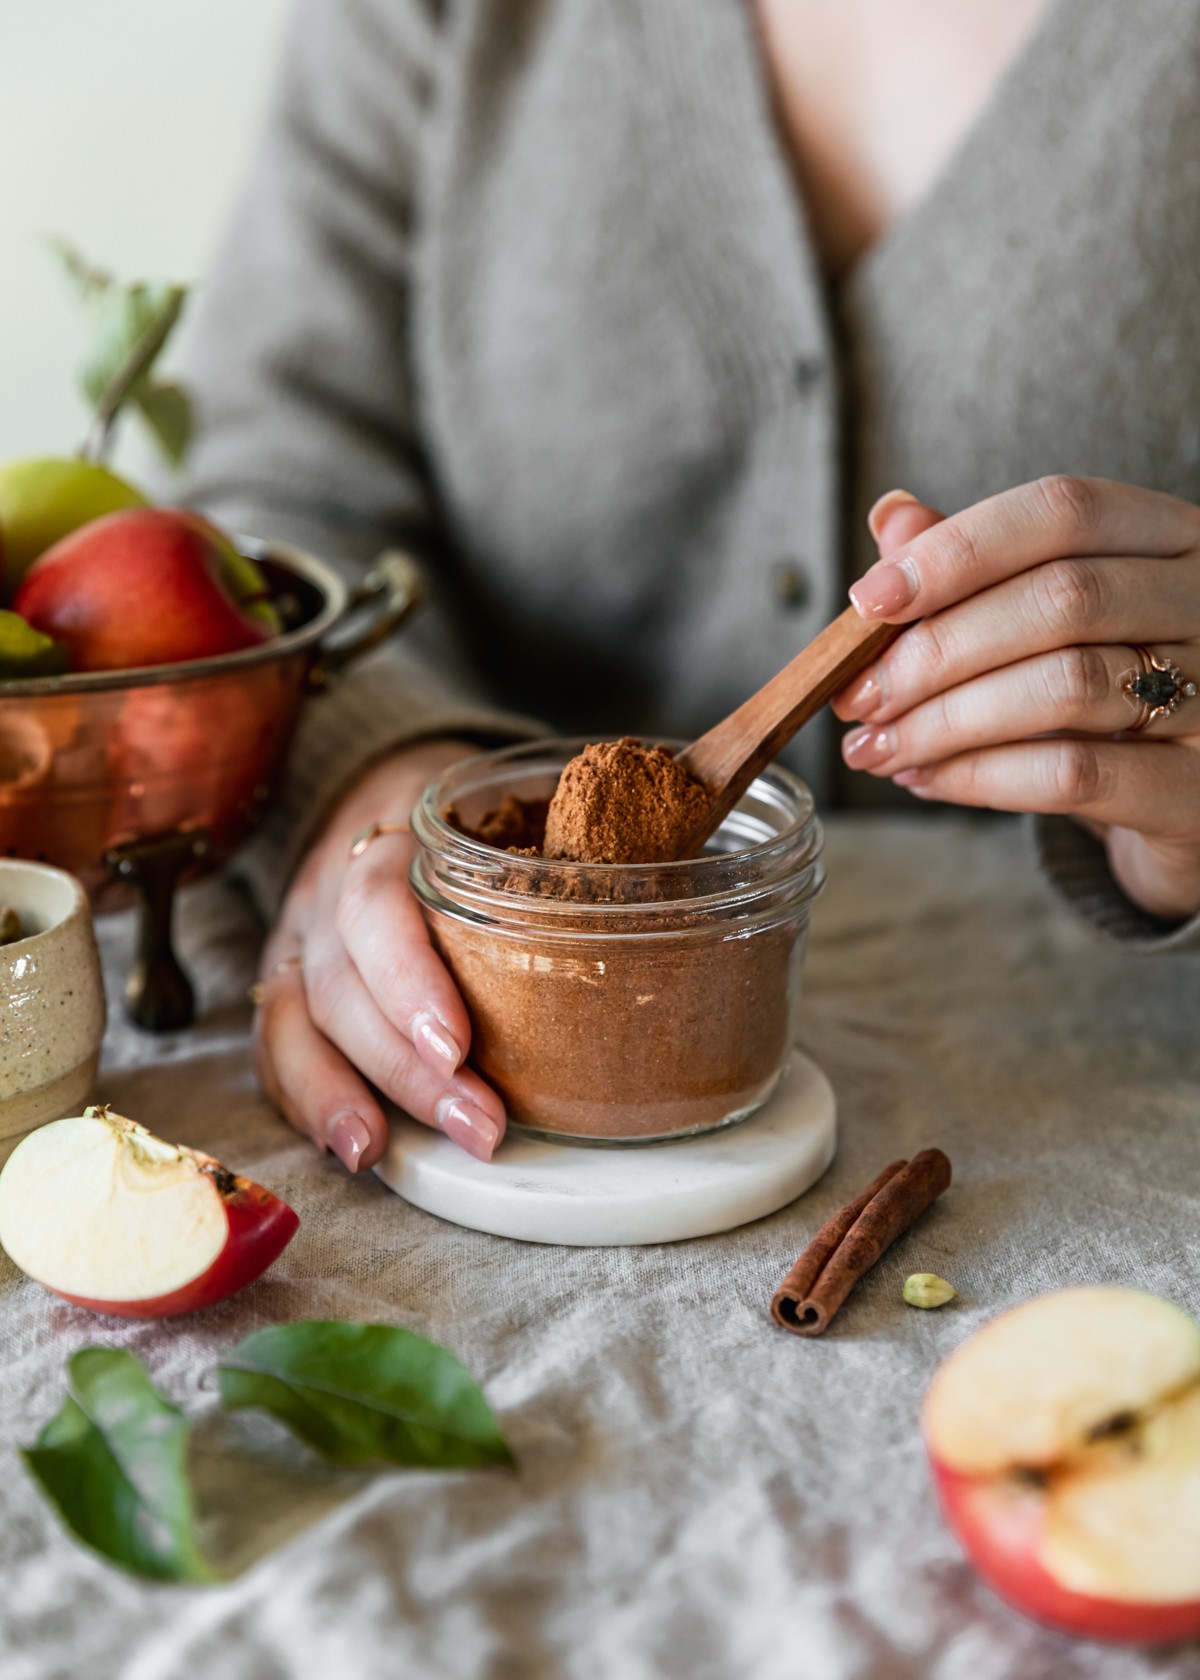 A side image of a woman wearing a beige sweater spooning homemade apple pie spice out of a jar with a wood spoon. The jar is on a beige linen next to a copper colander with apples, sliced apples, and a cinnamon stick.